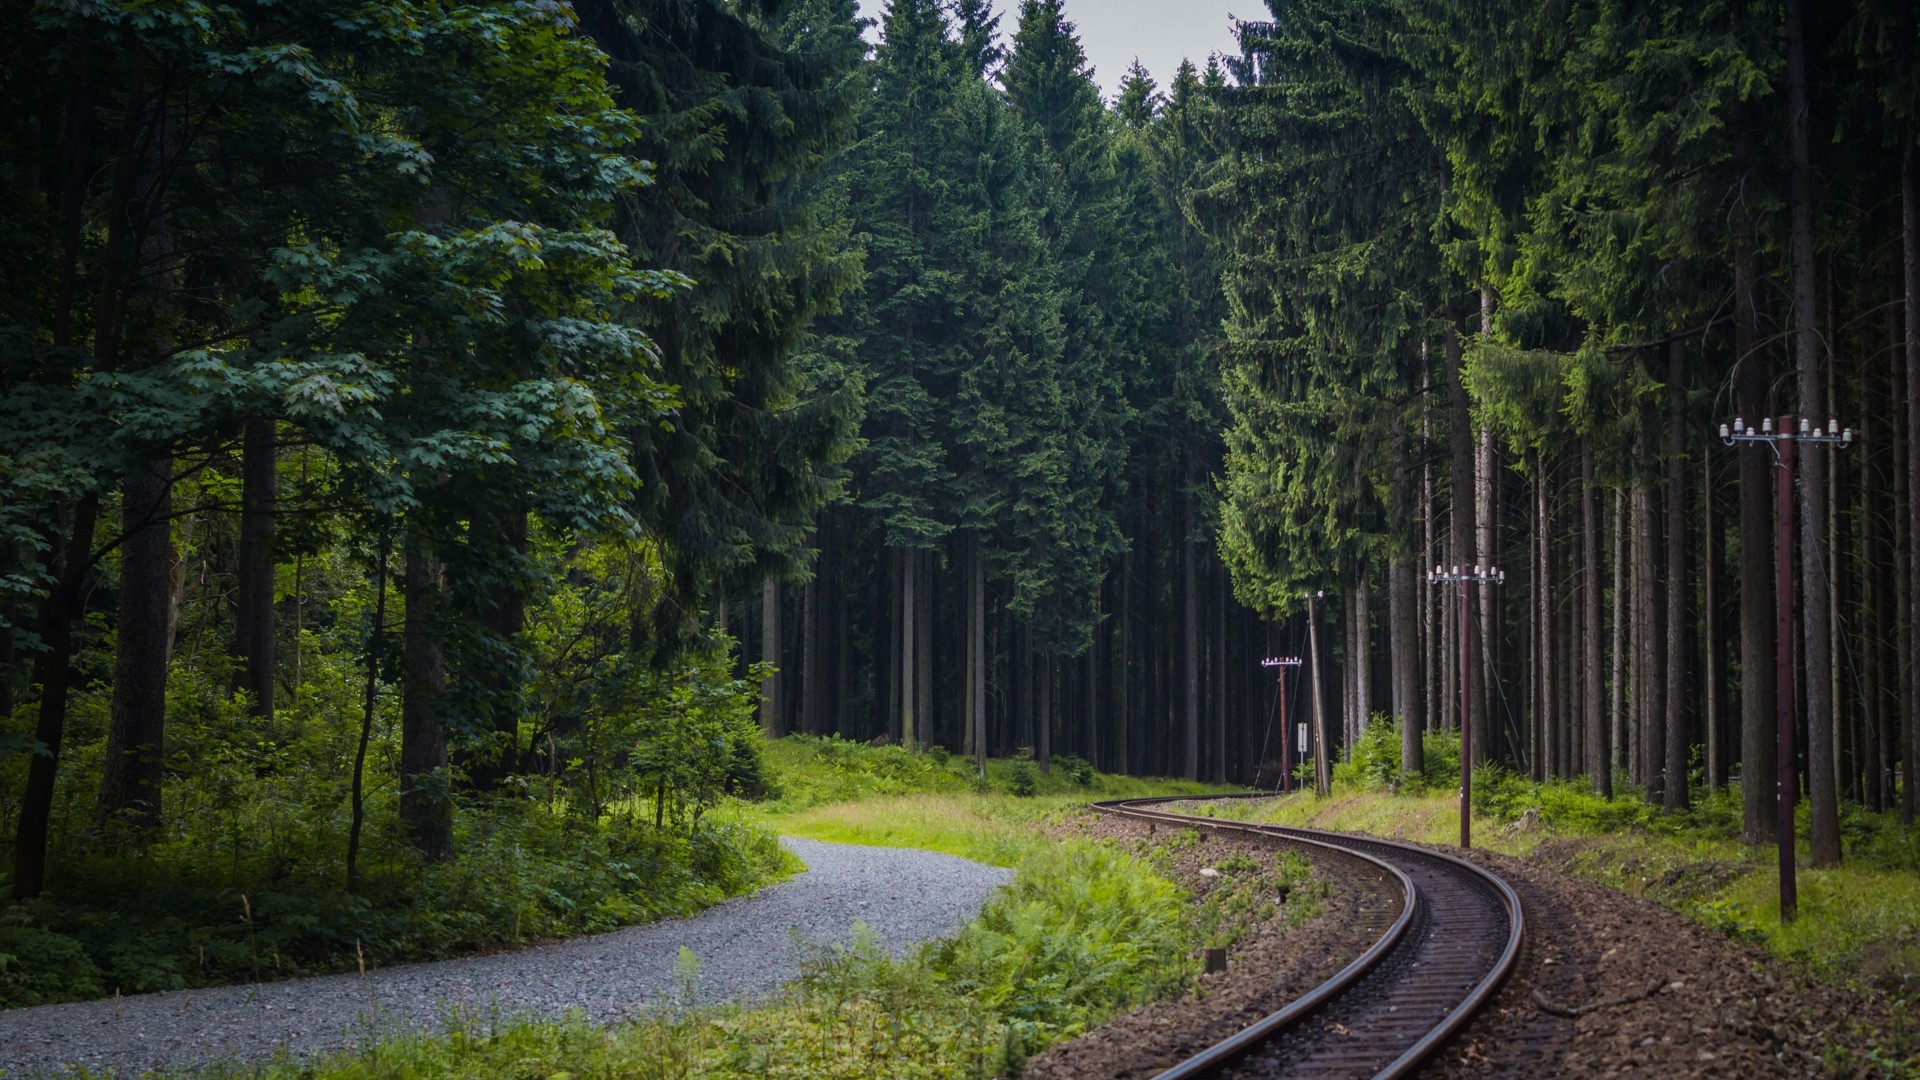 1920x1080 wallpapers: trees, forest, railway (image)